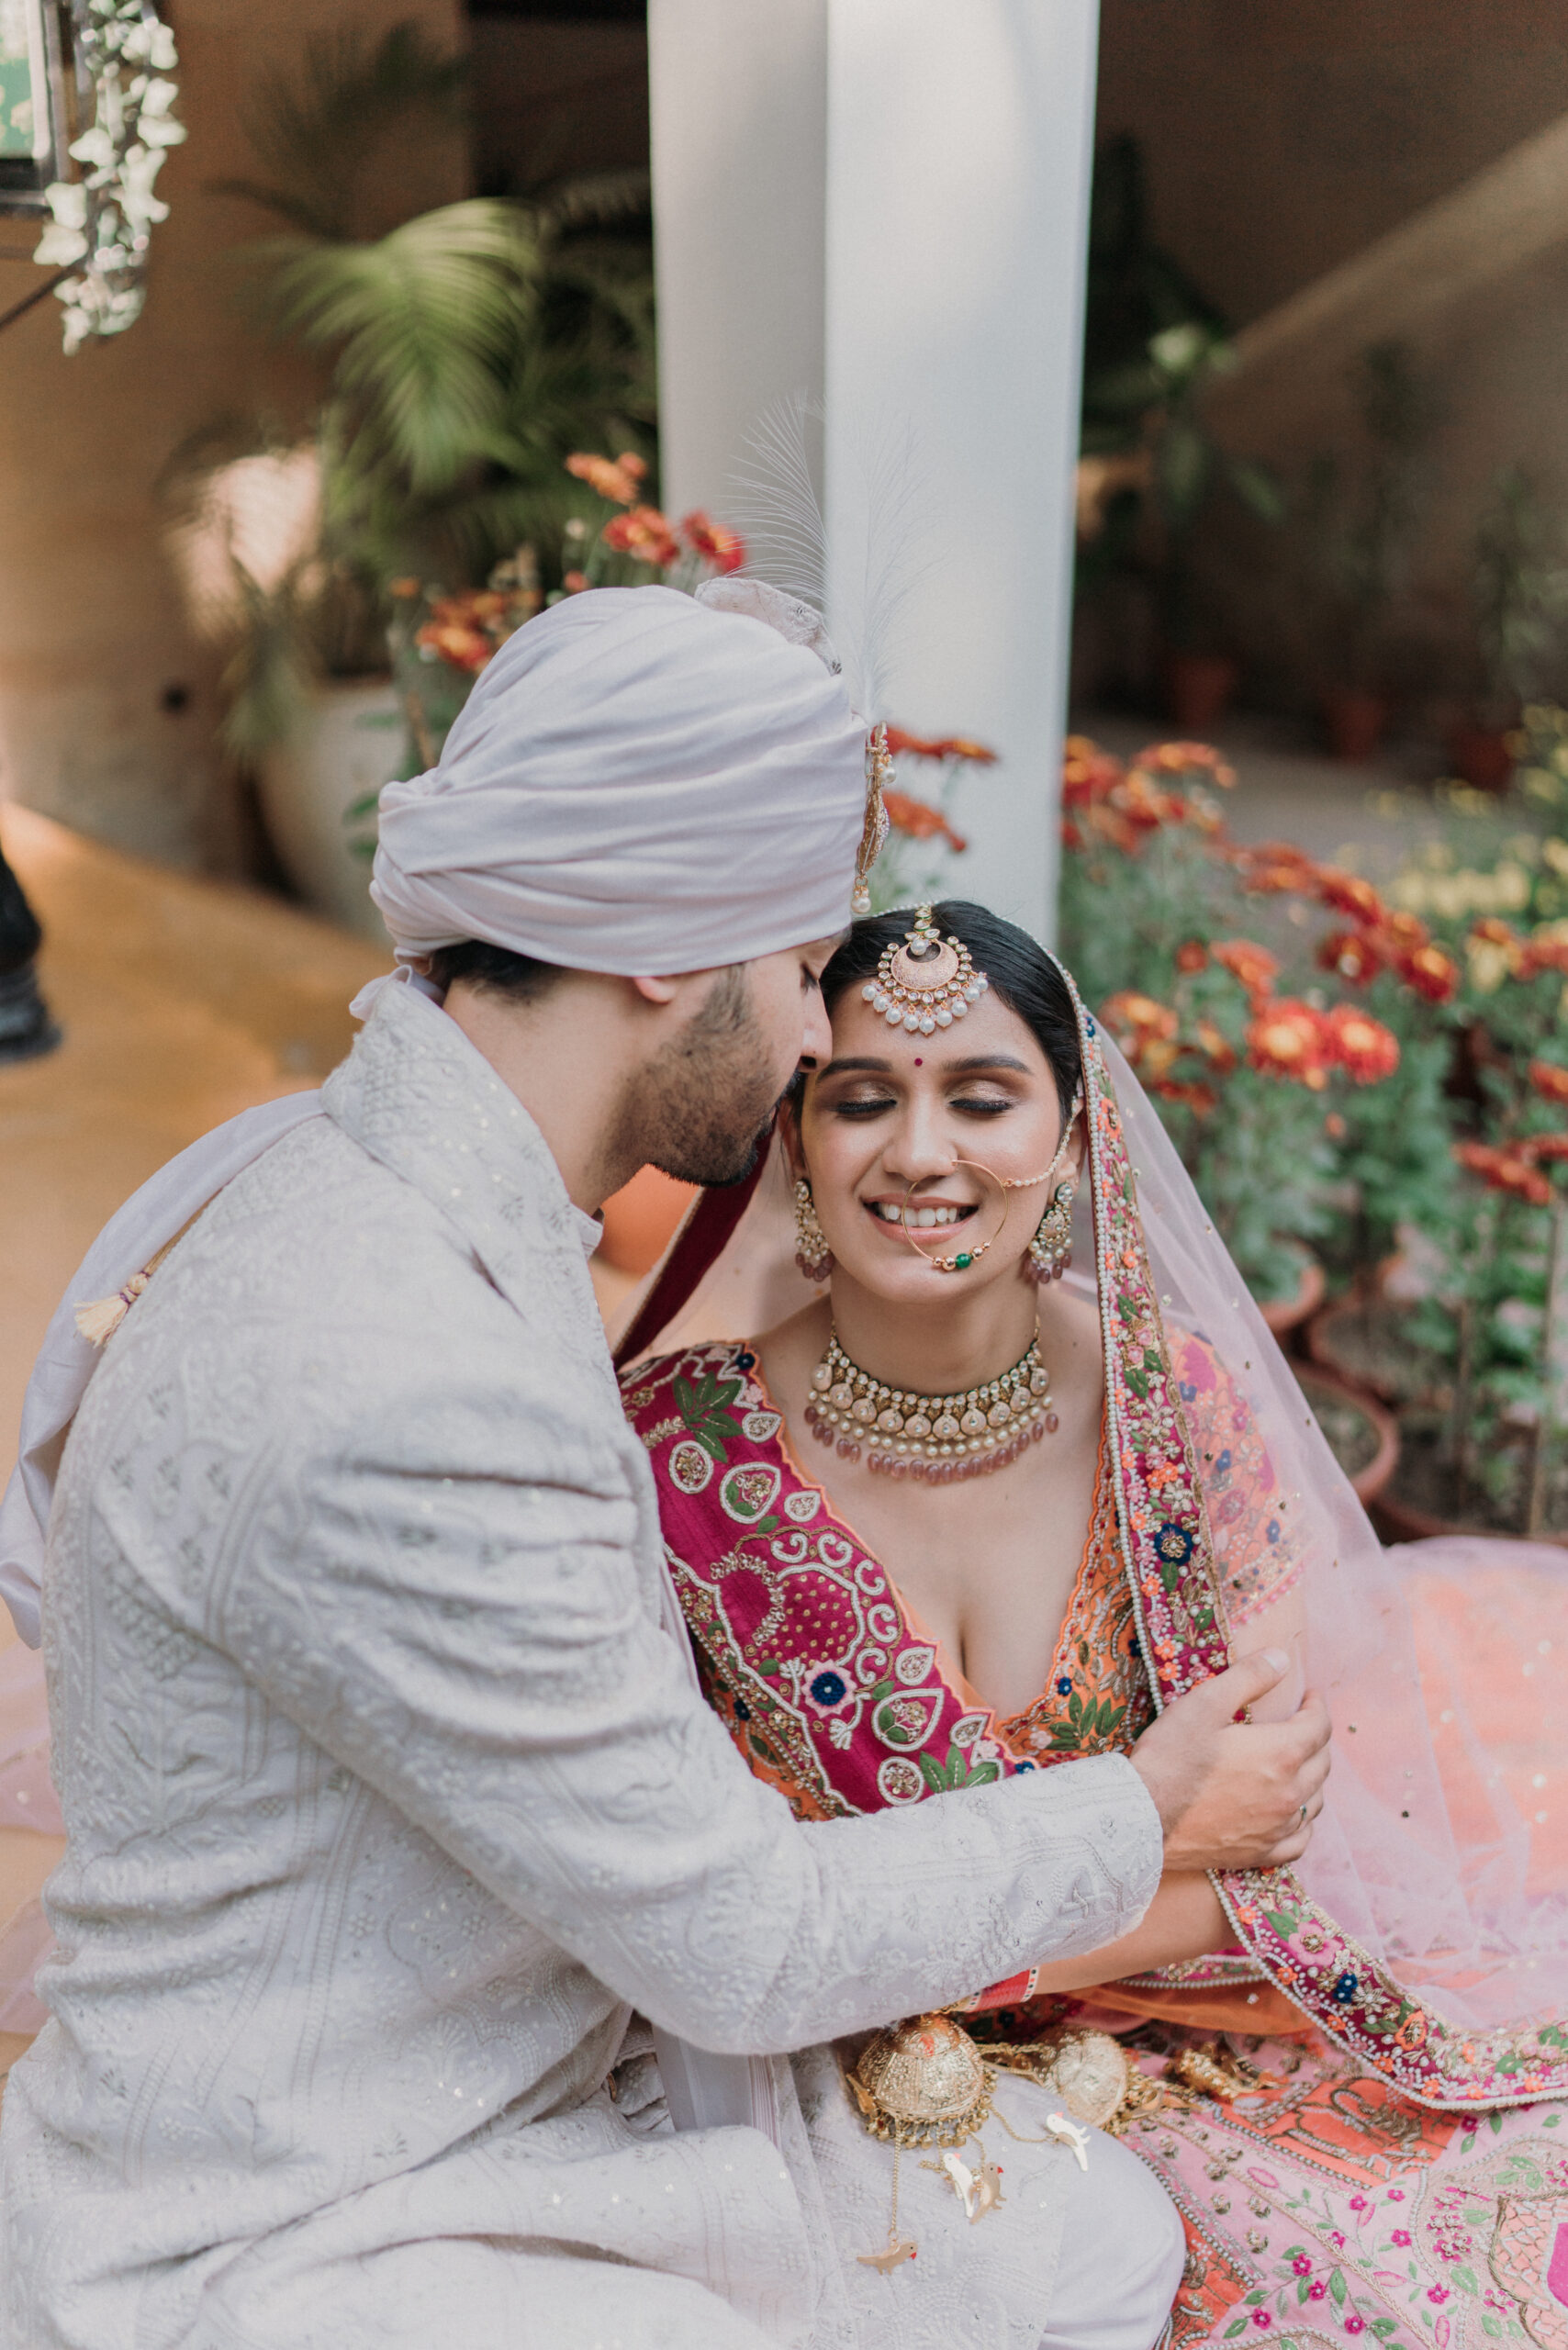 11 Wedding Photography Styles You Should Know | Wedding Spot Blog